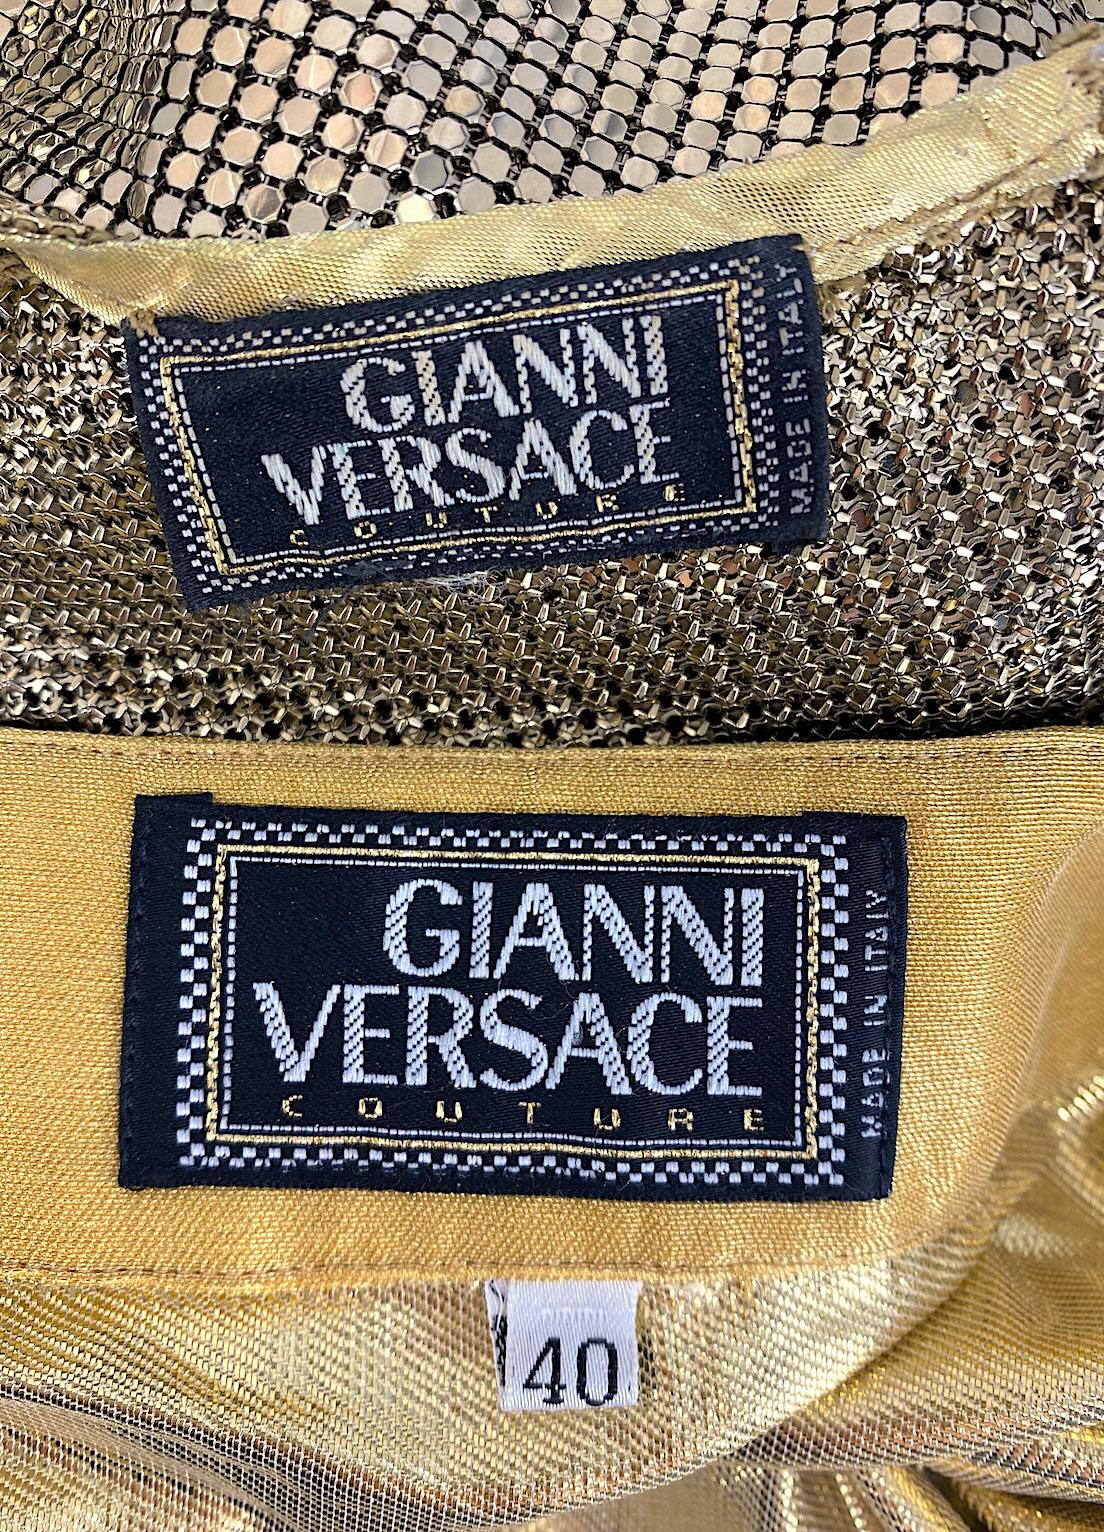 1994 F/W Gianni Versace Couture Gold Oroton Metal Mesh Chainmail Top & Skirt en vente 5